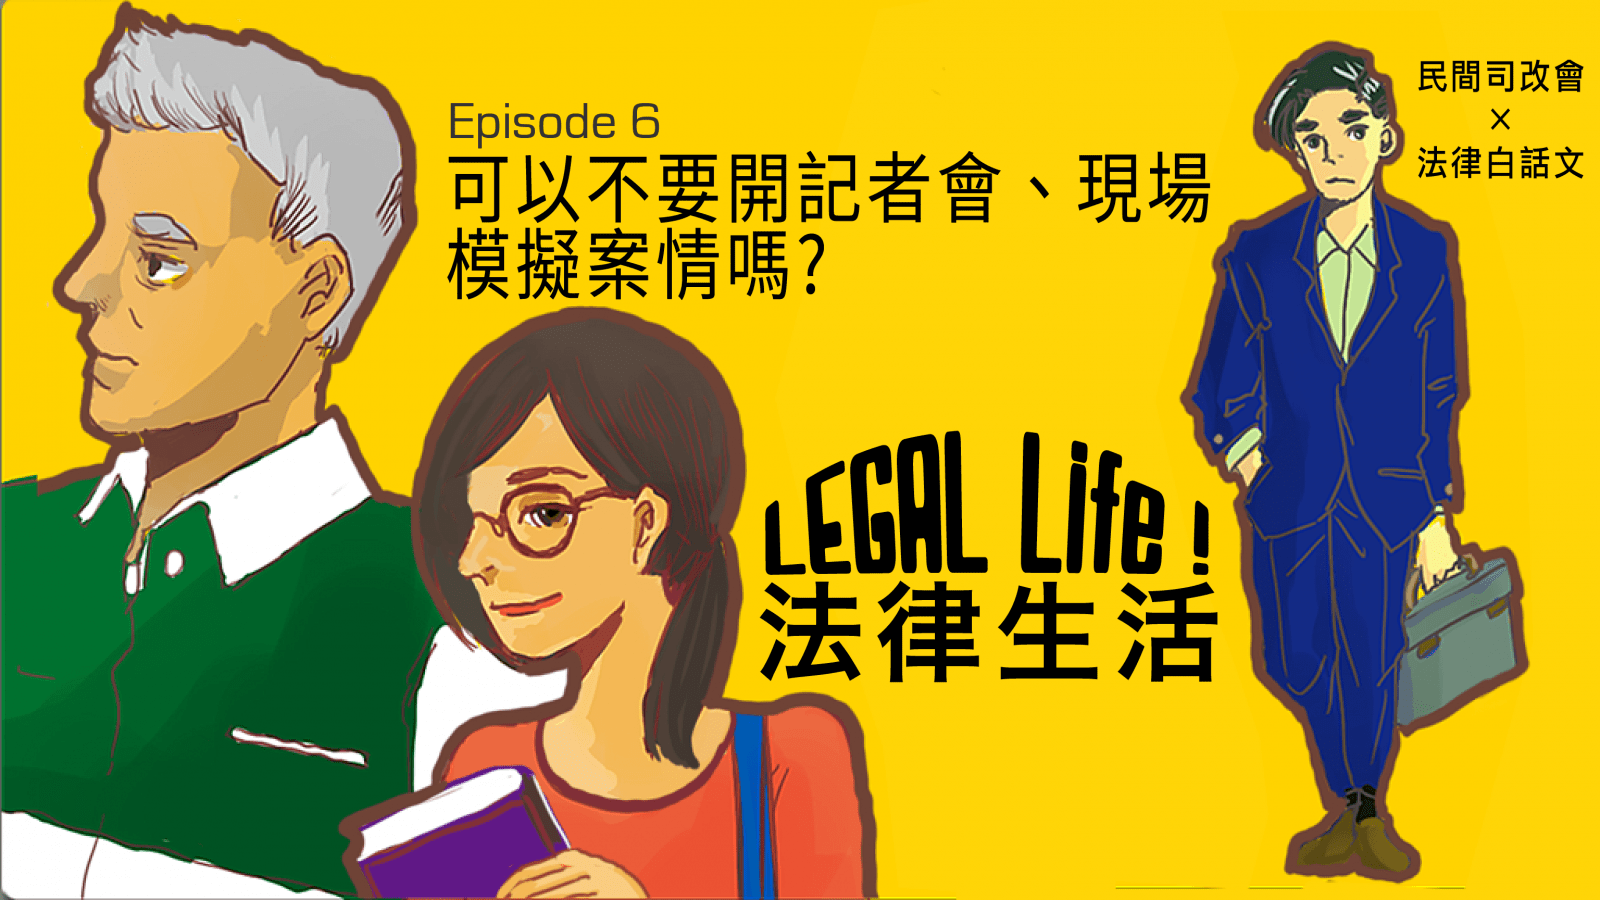 2016/07/legal-life-ep6-1.png